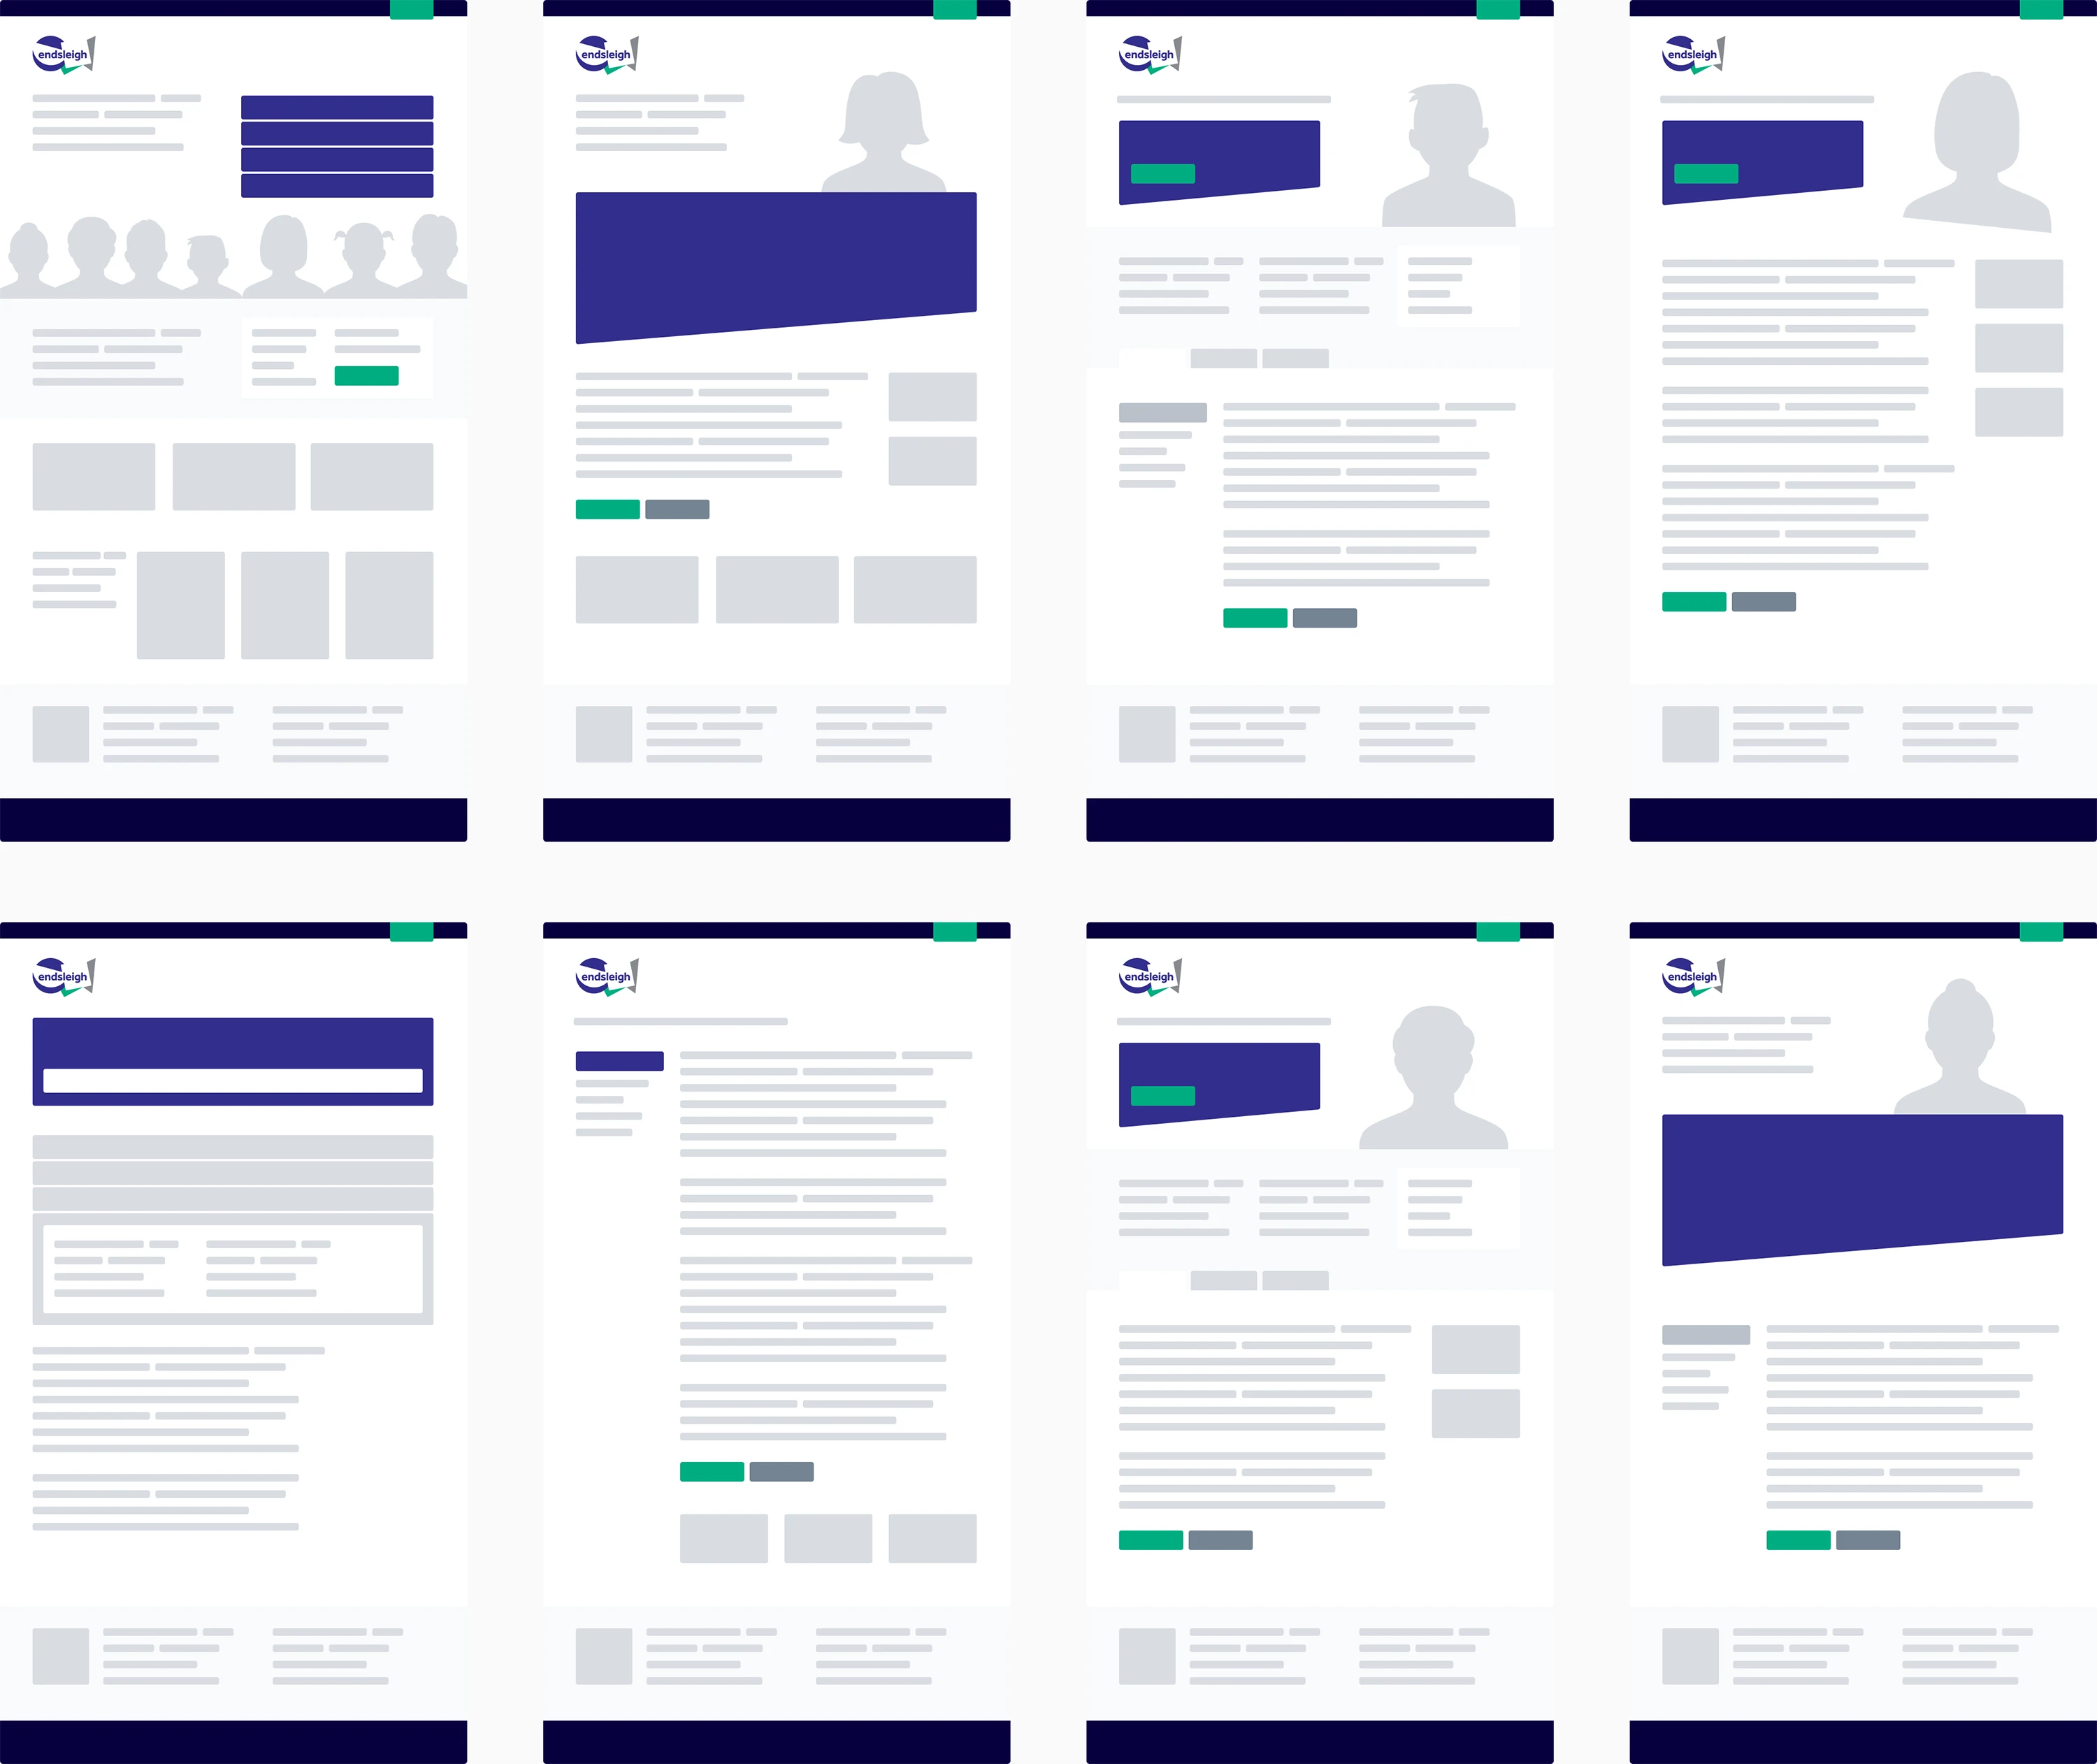 Abstract wireframes showing the modular nature of layouts